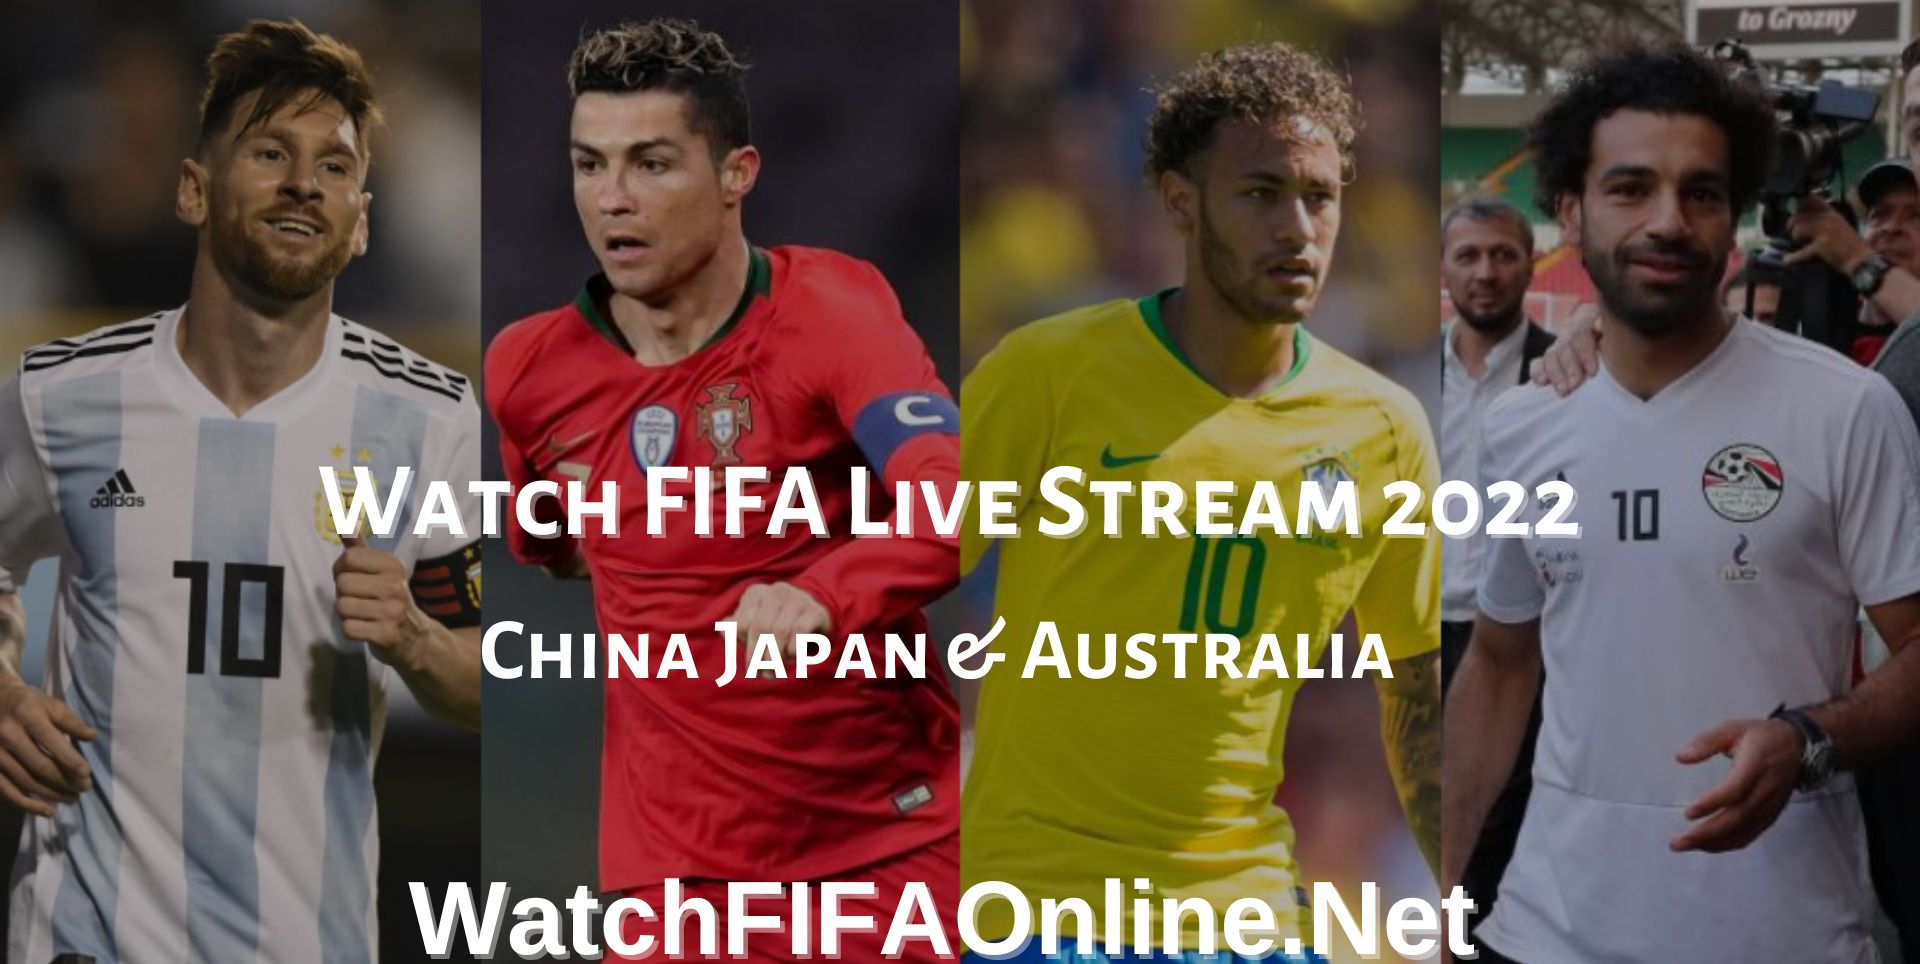 How To Watch FIFA In China Japan N Australia Live